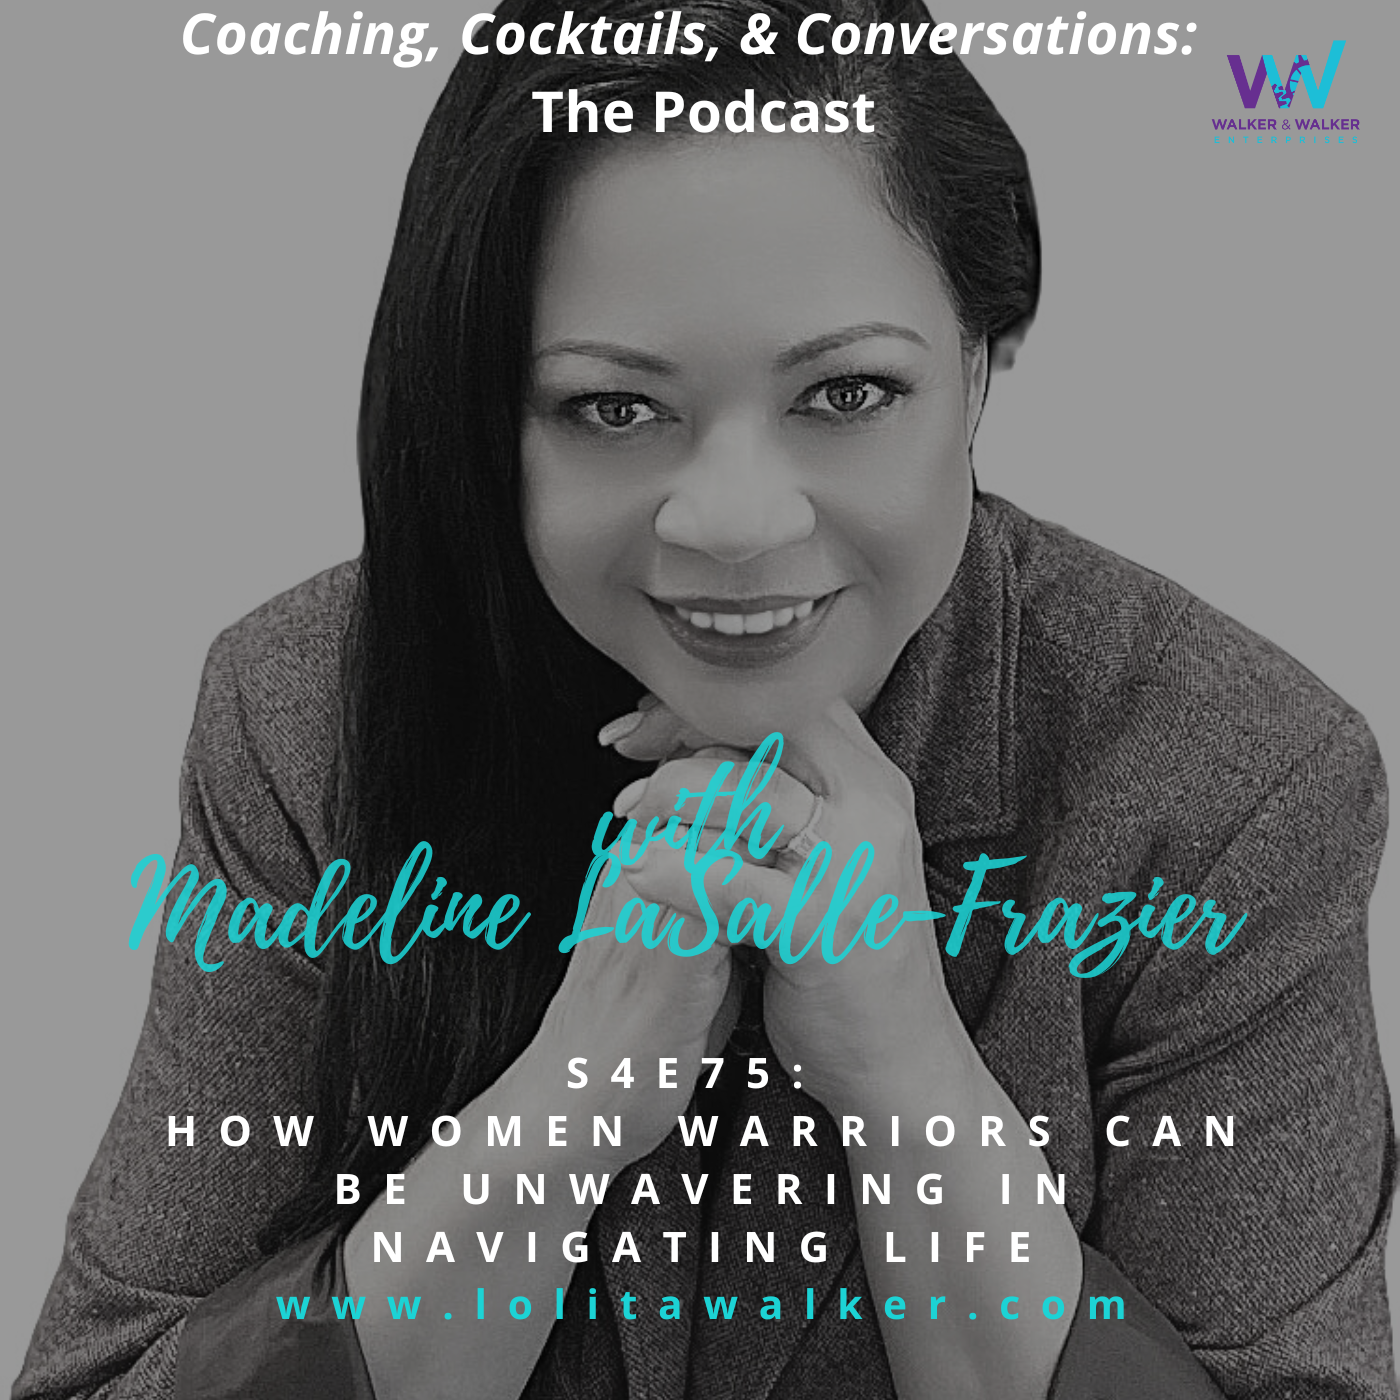 S4E75 - How Women Warriors Can Be Unwavering in Navigating Life (with Madeline LaSalle Frazier )